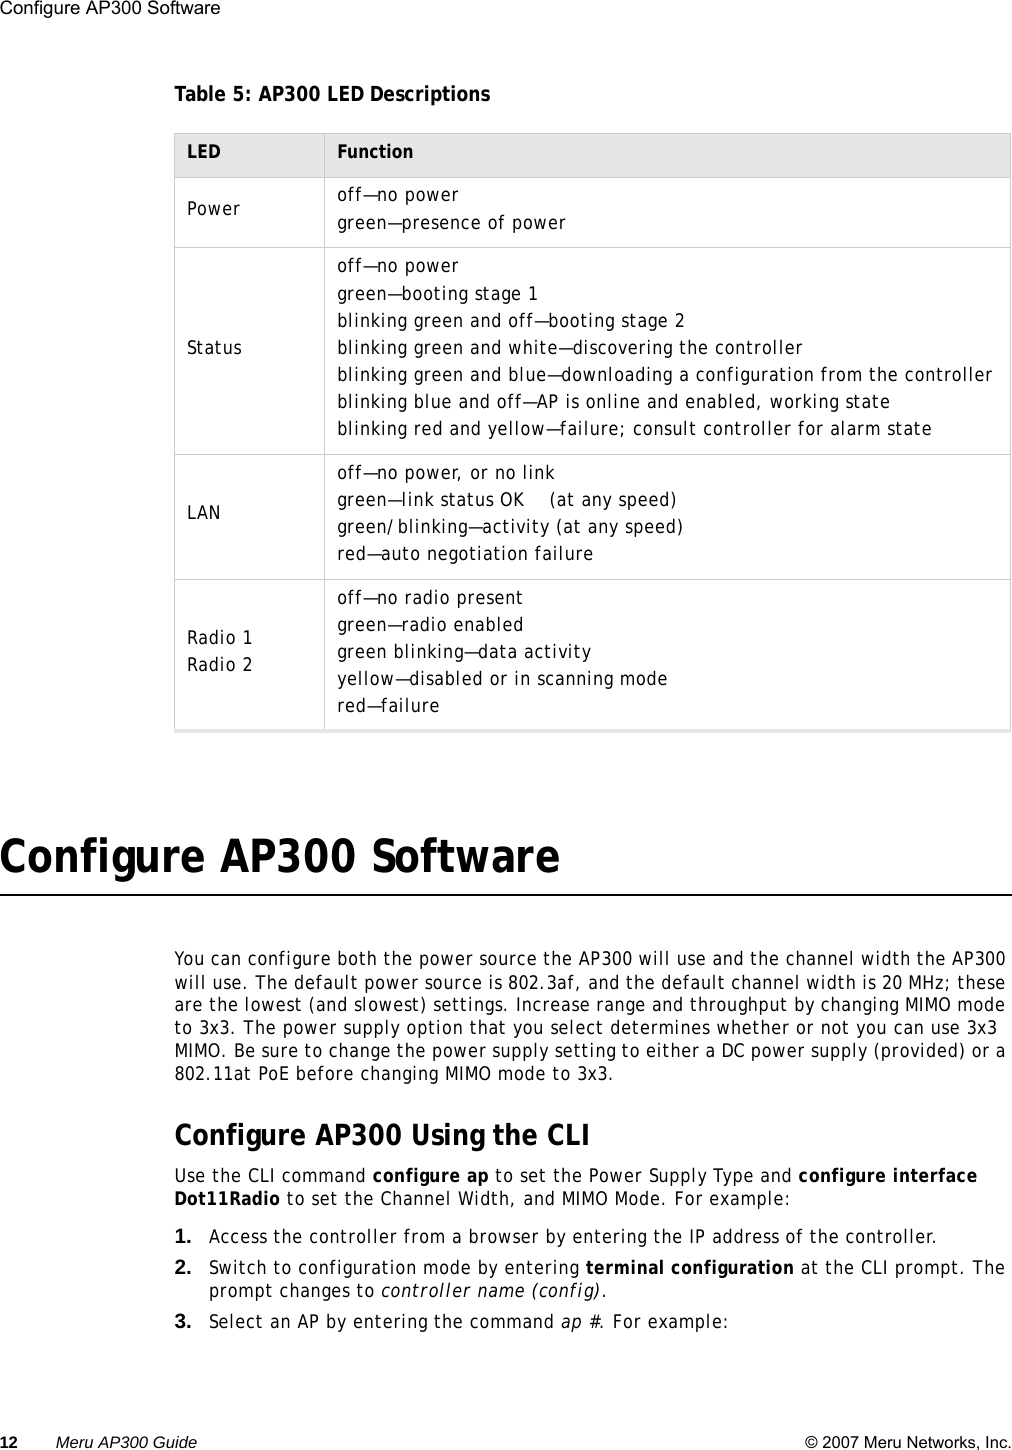 12 Meru AP300 Guide © 2007 Meru Networks, Inc.Configure AP300 Software Table 5: AP300 LED DescriptionsConfigure AP300 SoftwareYou can configure both the power source the AP300 will use and the channel width the AP300 will use. The default power source is 802.3af, and the default channel width is 20 MHz; these are the lowest (and slowest) settings. Increase range and throughput by changing MIMO mode to 3x3. The power supply option that you select determines whether or not you can use 3x3 MIMO. Be sure to change the power supply setting to either a DC power supply (provided) or a 802.11at PoE before changing MIMO mode to 3x3. Configure AP300 Using the CLIUse the CLI command configure ap to set the Power Supply Type and configure interface Dot11Radio to set the Channel Width, and MIMO Mode. For example:1. Access the controller from a browser by entering the IP address of the controller.2. Switch to configuration mode by entering terminal configuration at the CLI prompt. The prompt changes to controller name (config).3. Select an AP by entering the command ap #. For example:LED FunctionPower off—no powergreen—presence of powerStatusoff—no powergreen—booting stage 1blinking green and off—booting stage 2blinking green and white—discovering the controllerblinking green and blue—downloading a configuration from the controllerblinking blue and off—AP is online and enabled, working stateblinking red and yellow—failure; consult controller for alarm stateLANoff—no power, or no linkgreen—link status OK    (at any speed)green/blinking—activity (at any speed)red—auto negotiation failureRadio 1Radio 2off—no radio presentgreen—radio enabledgreen blinking—data activityyellow—disabled or in scanning modered—failure